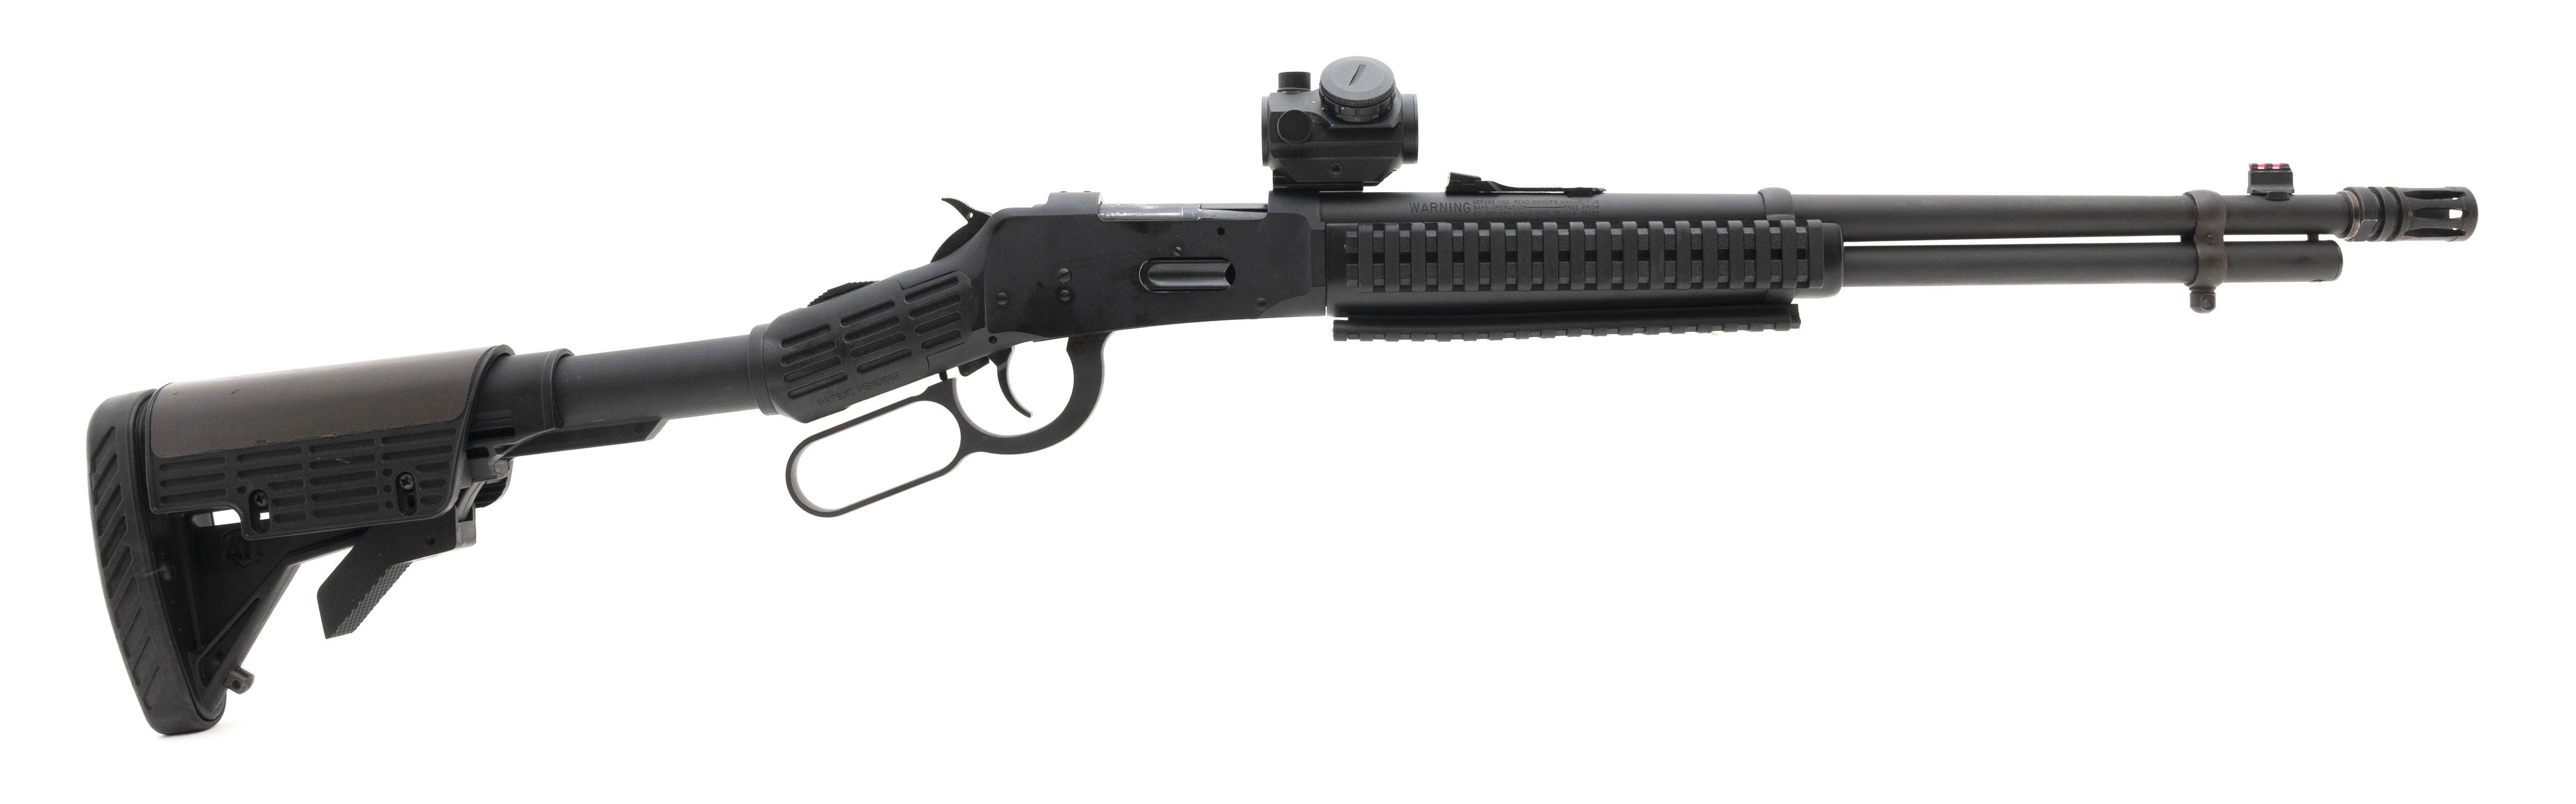 Mossberg Tactical Caliber Rifle For Sale